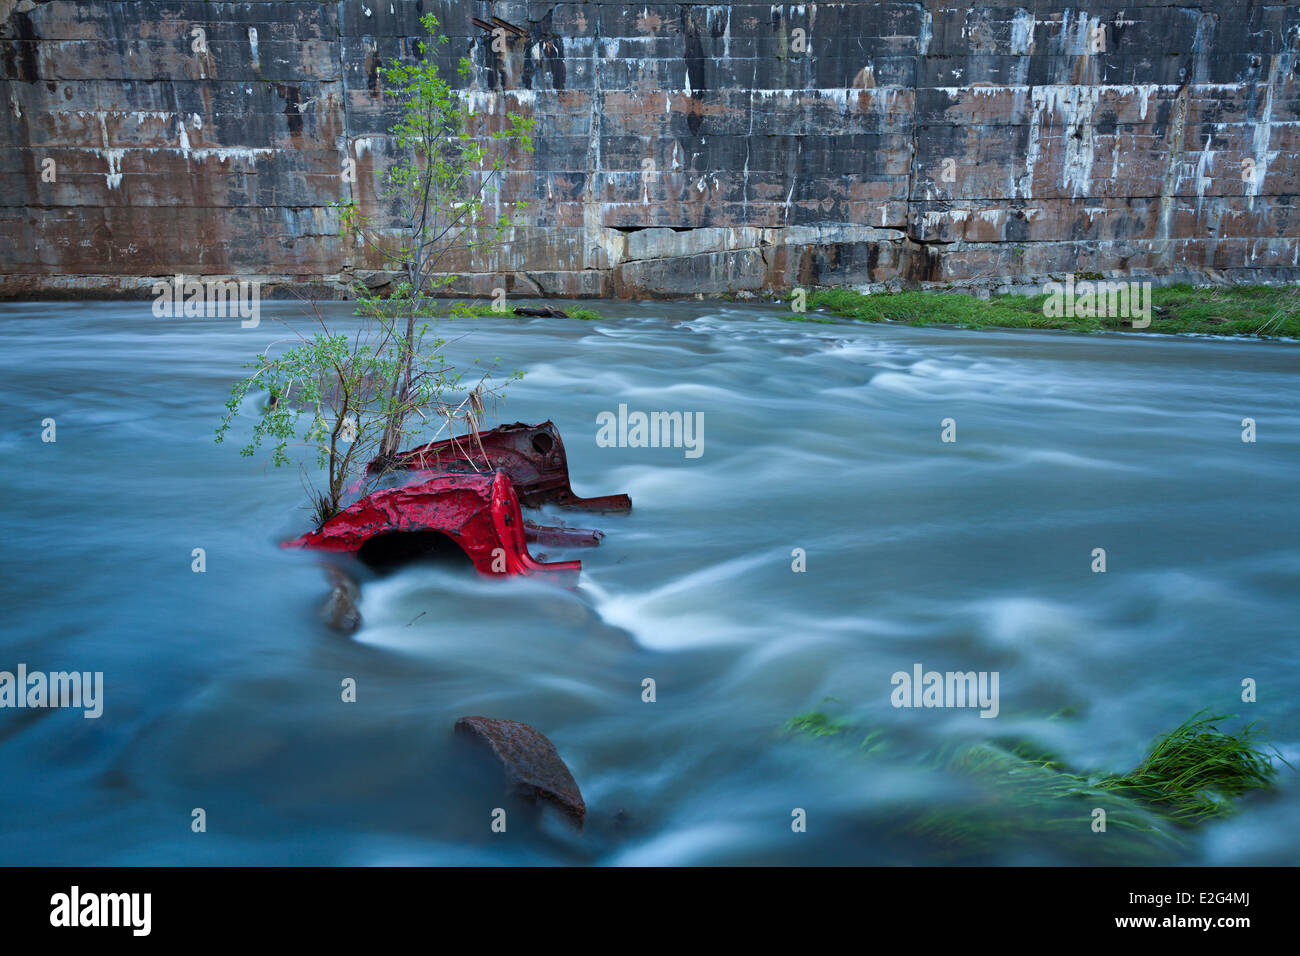 Remains of a red car in the Holland River. Rogers Reservoir, East Gwillimbury, Ontario, Canada. Stock Photo